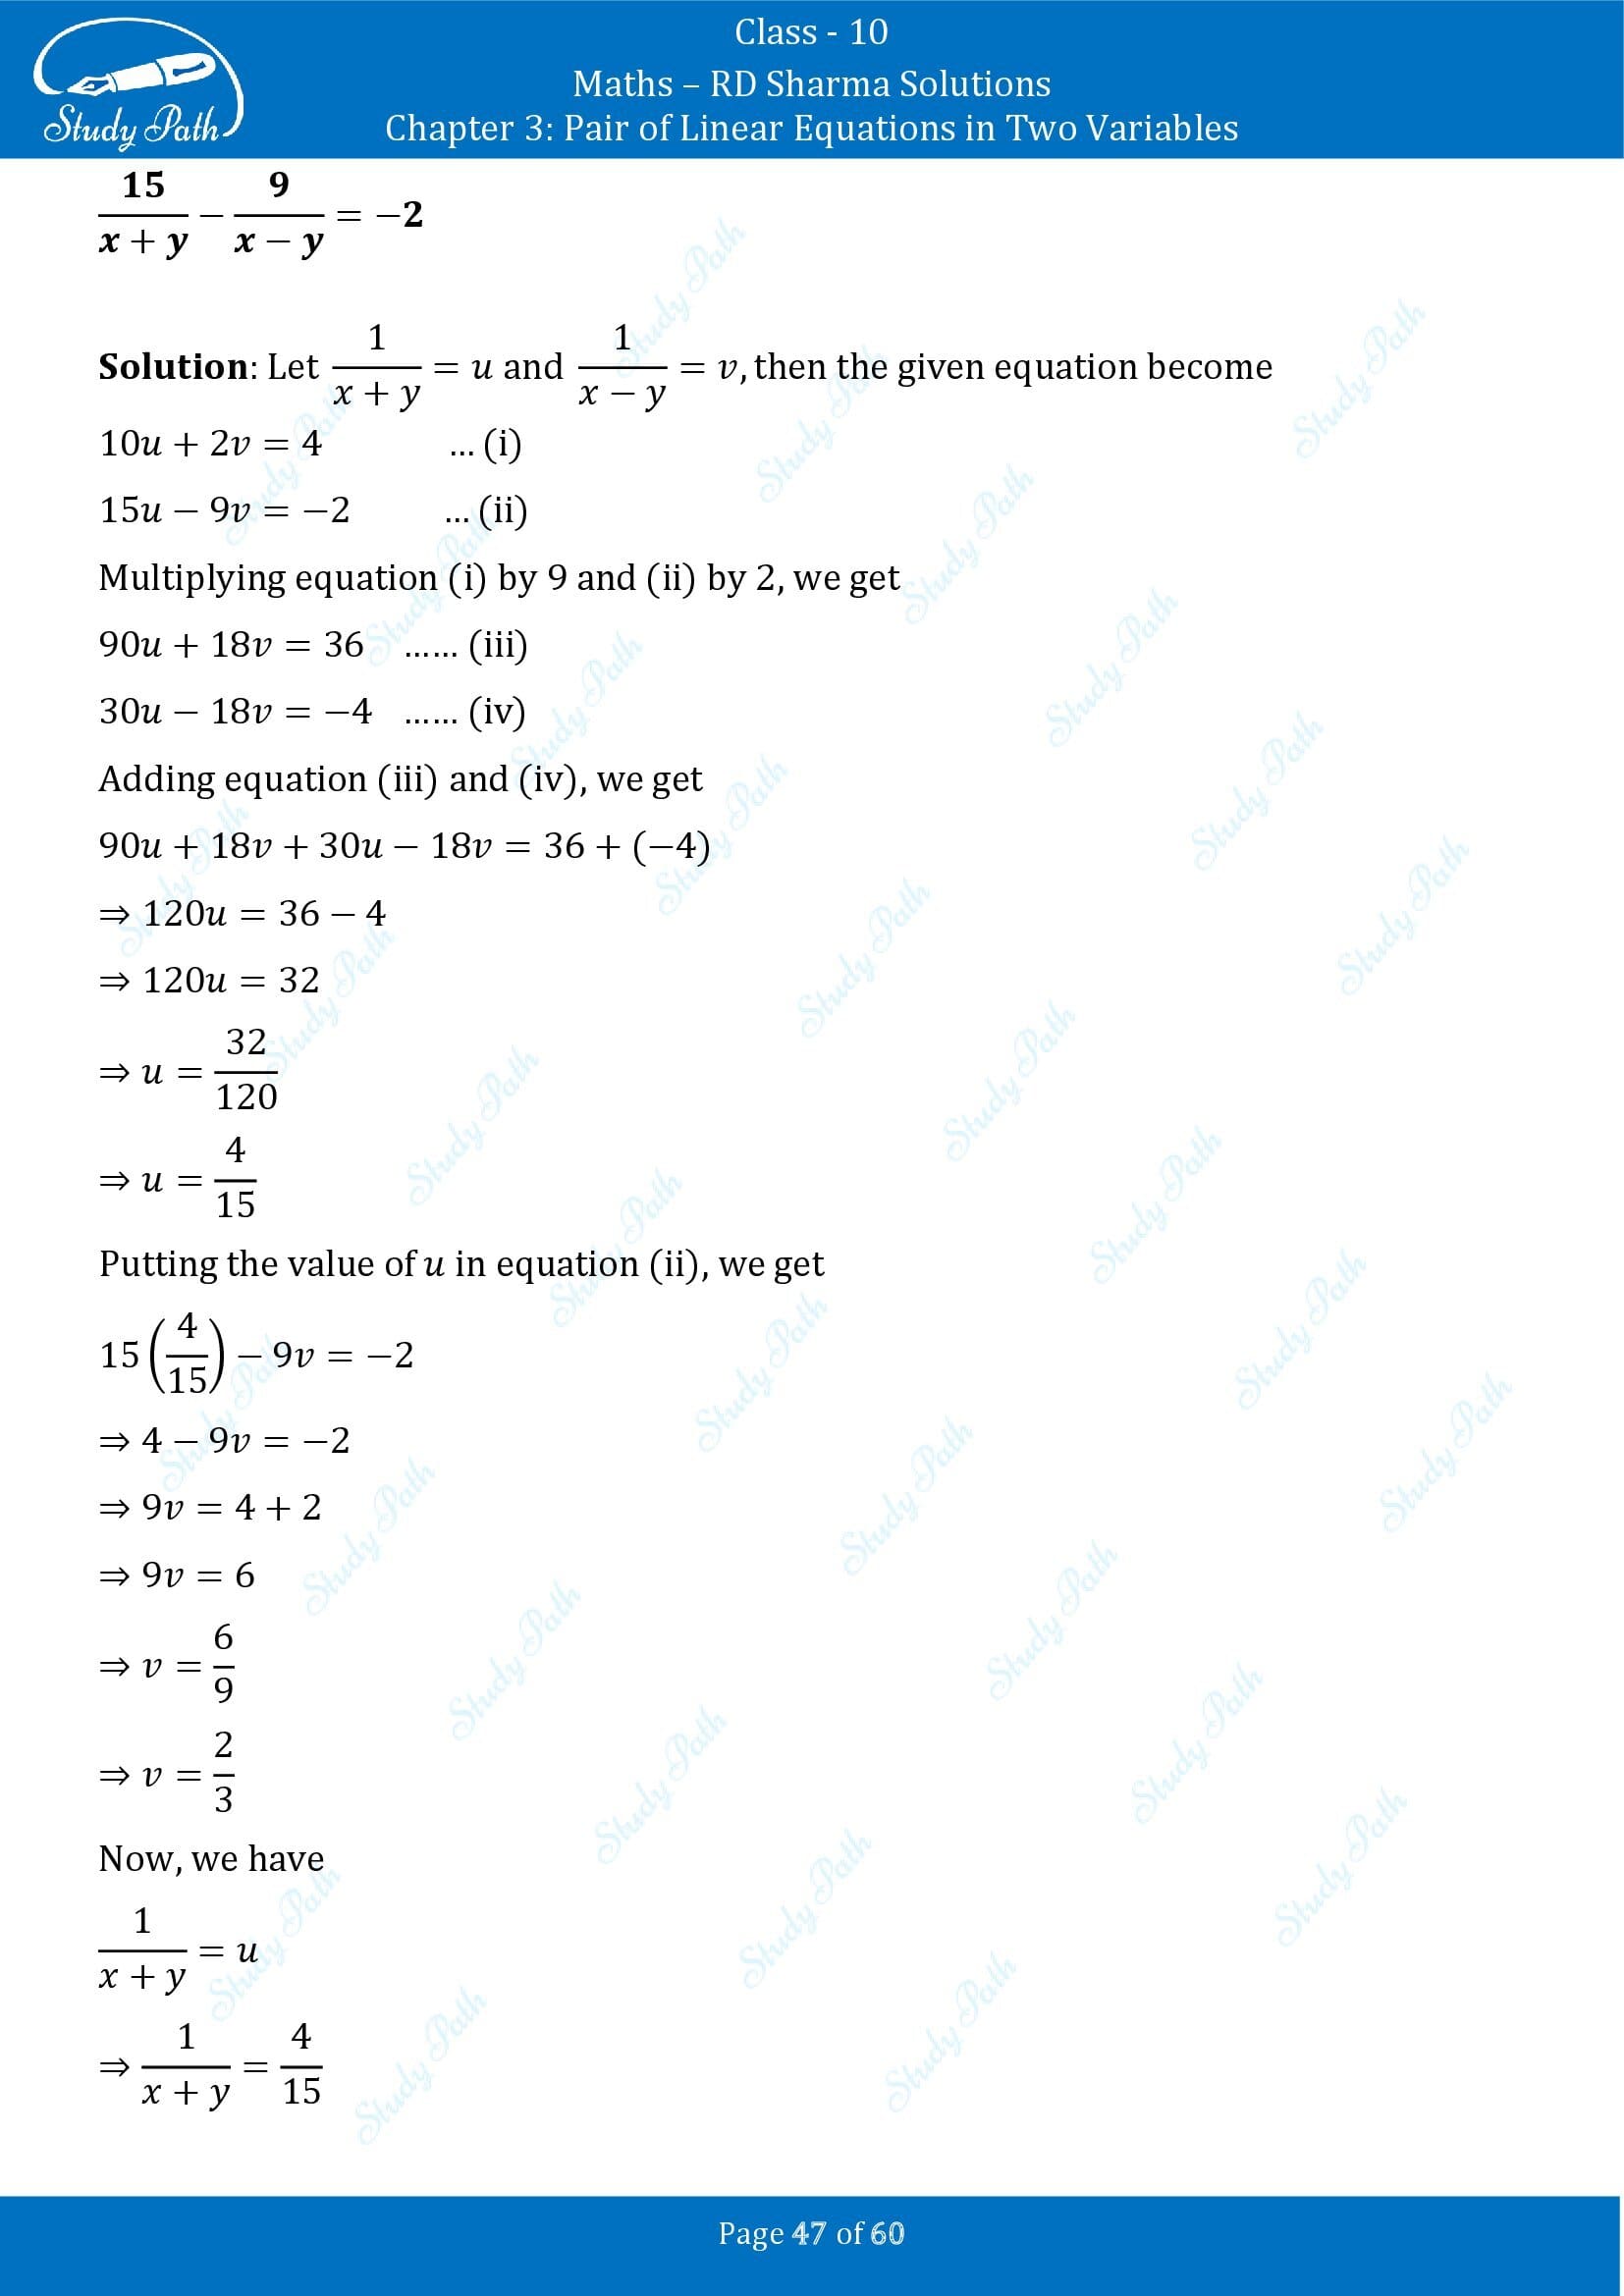 RD Sharma Solutions Class 10 Chapter 3 Pair of Linear Equations in Two Variables Exercise 3.3 00047